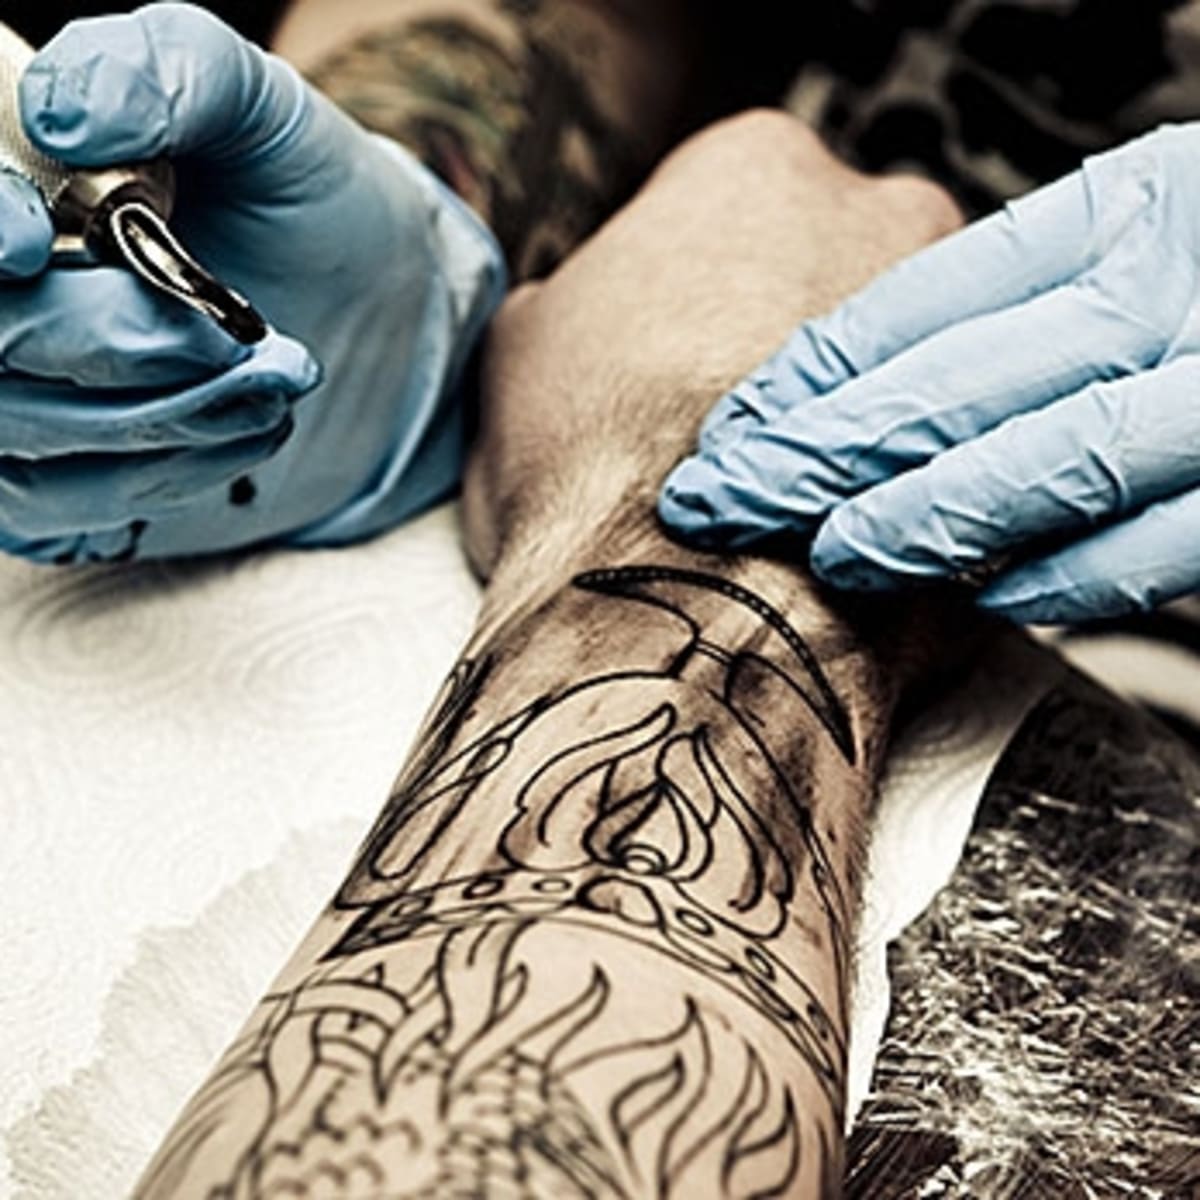 6 Good Reasons to Finally Get That Tattoo - Men's Journal